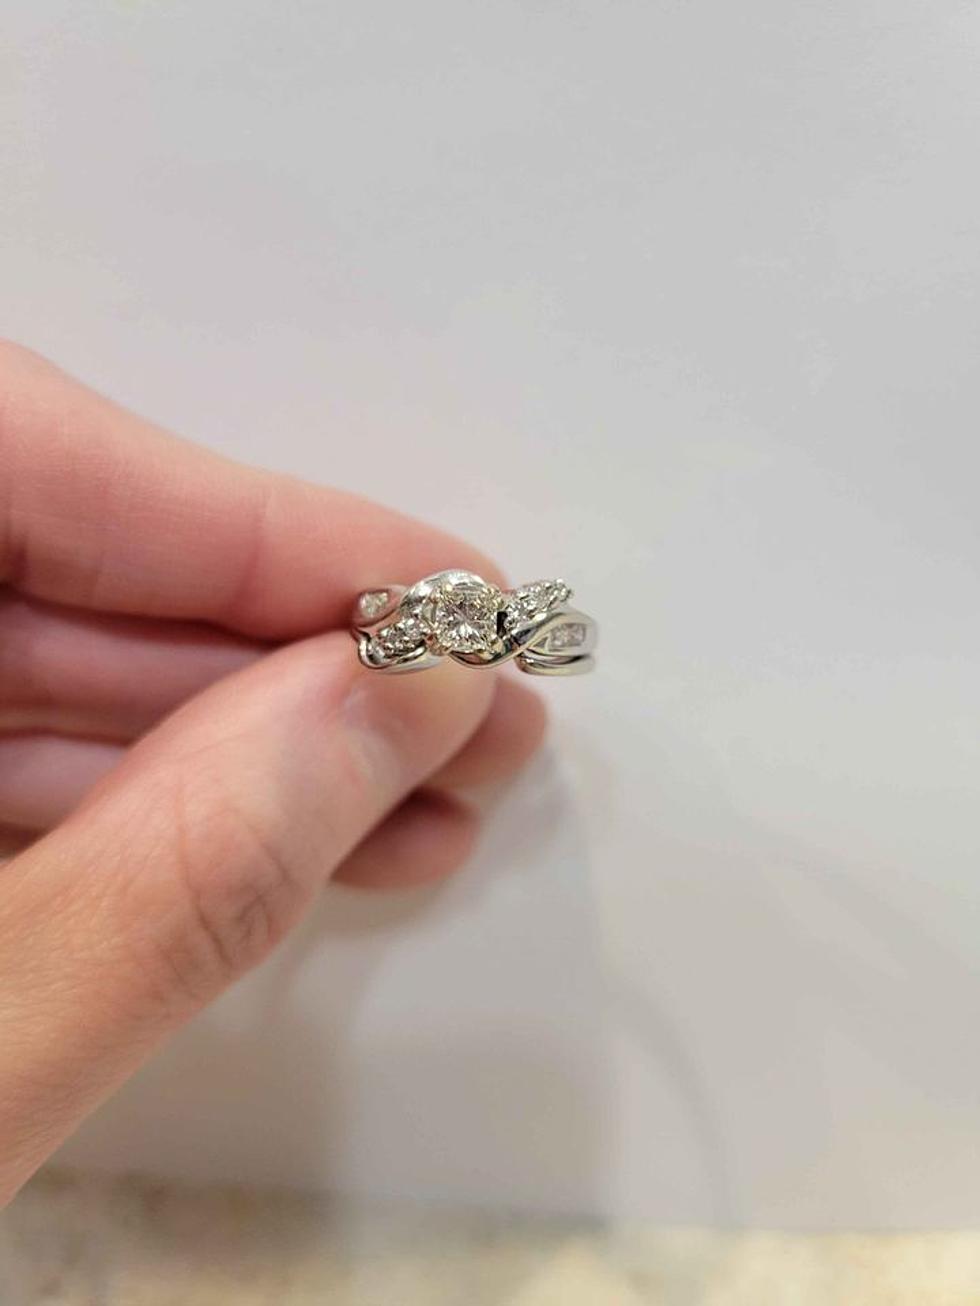 Casper Woman Selling ‘Totally Not Cursed Engagement Ring’ on Casper Classifieds